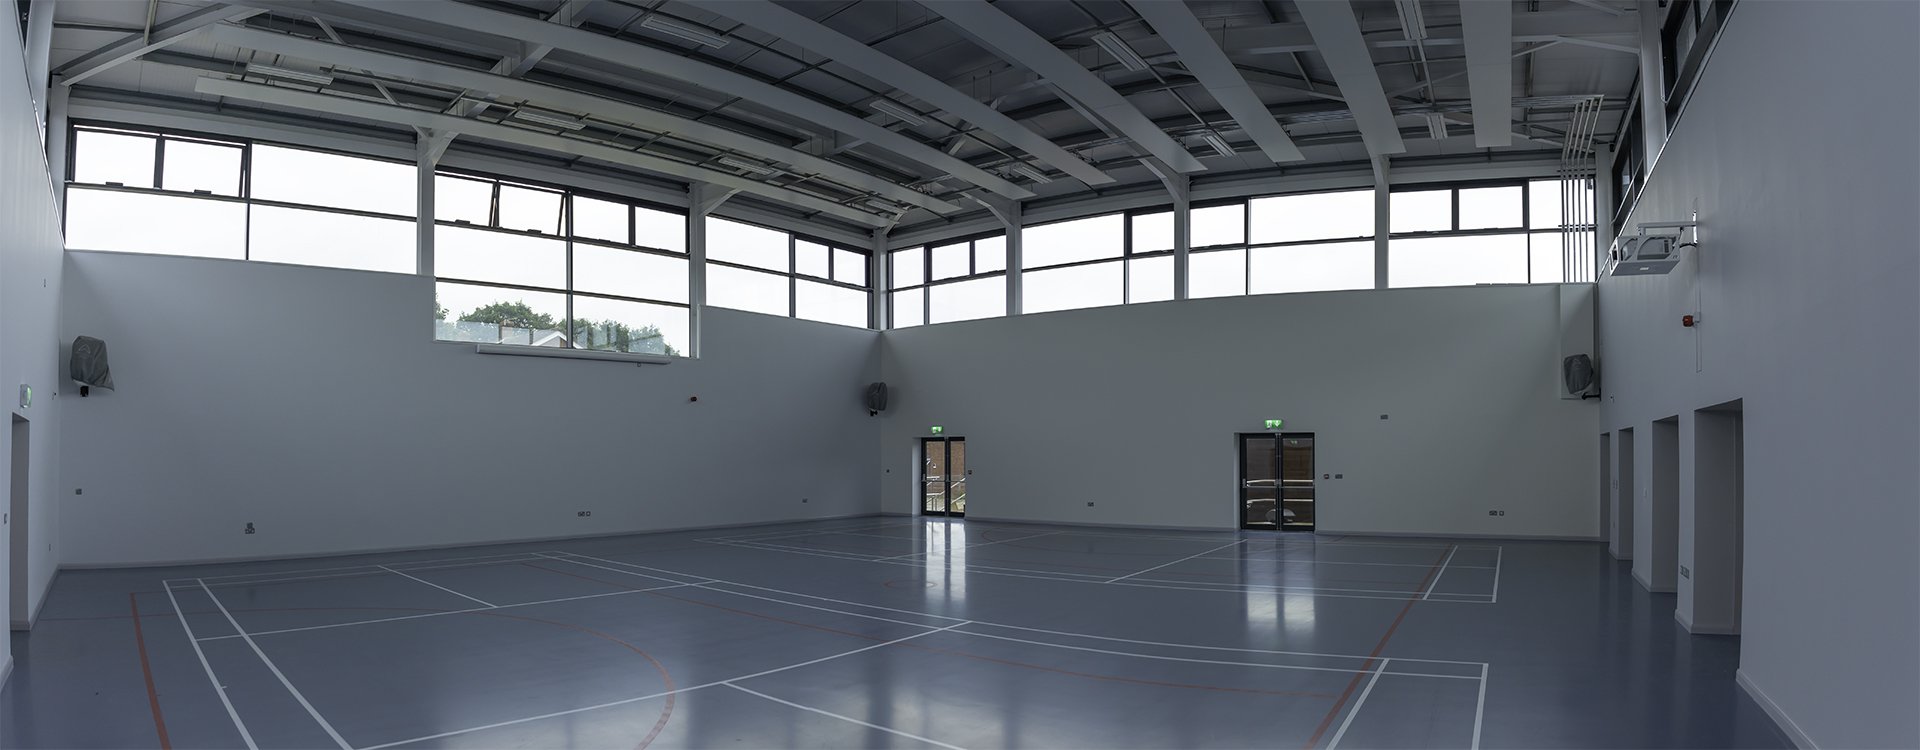 Sprowston Town Sports Hall.jpg